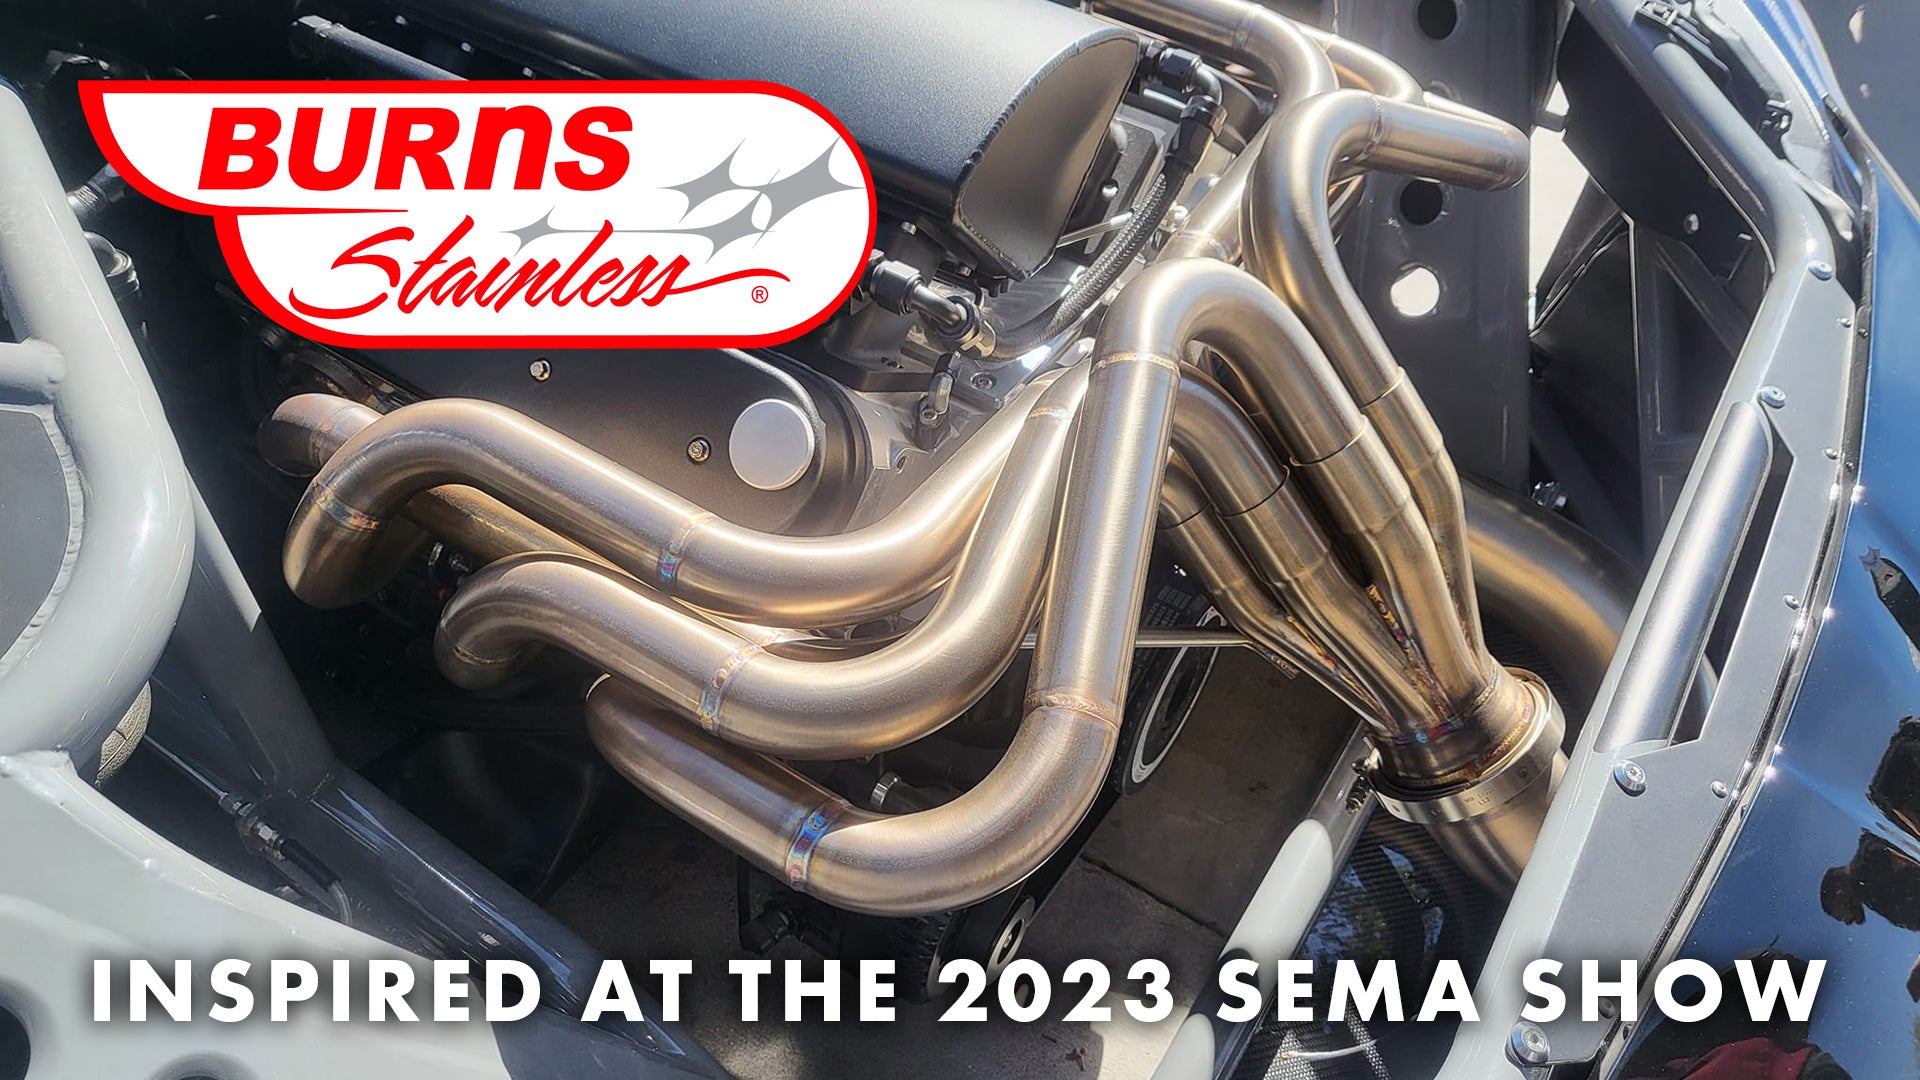 Get Inspired at the 2023 SEMA Show